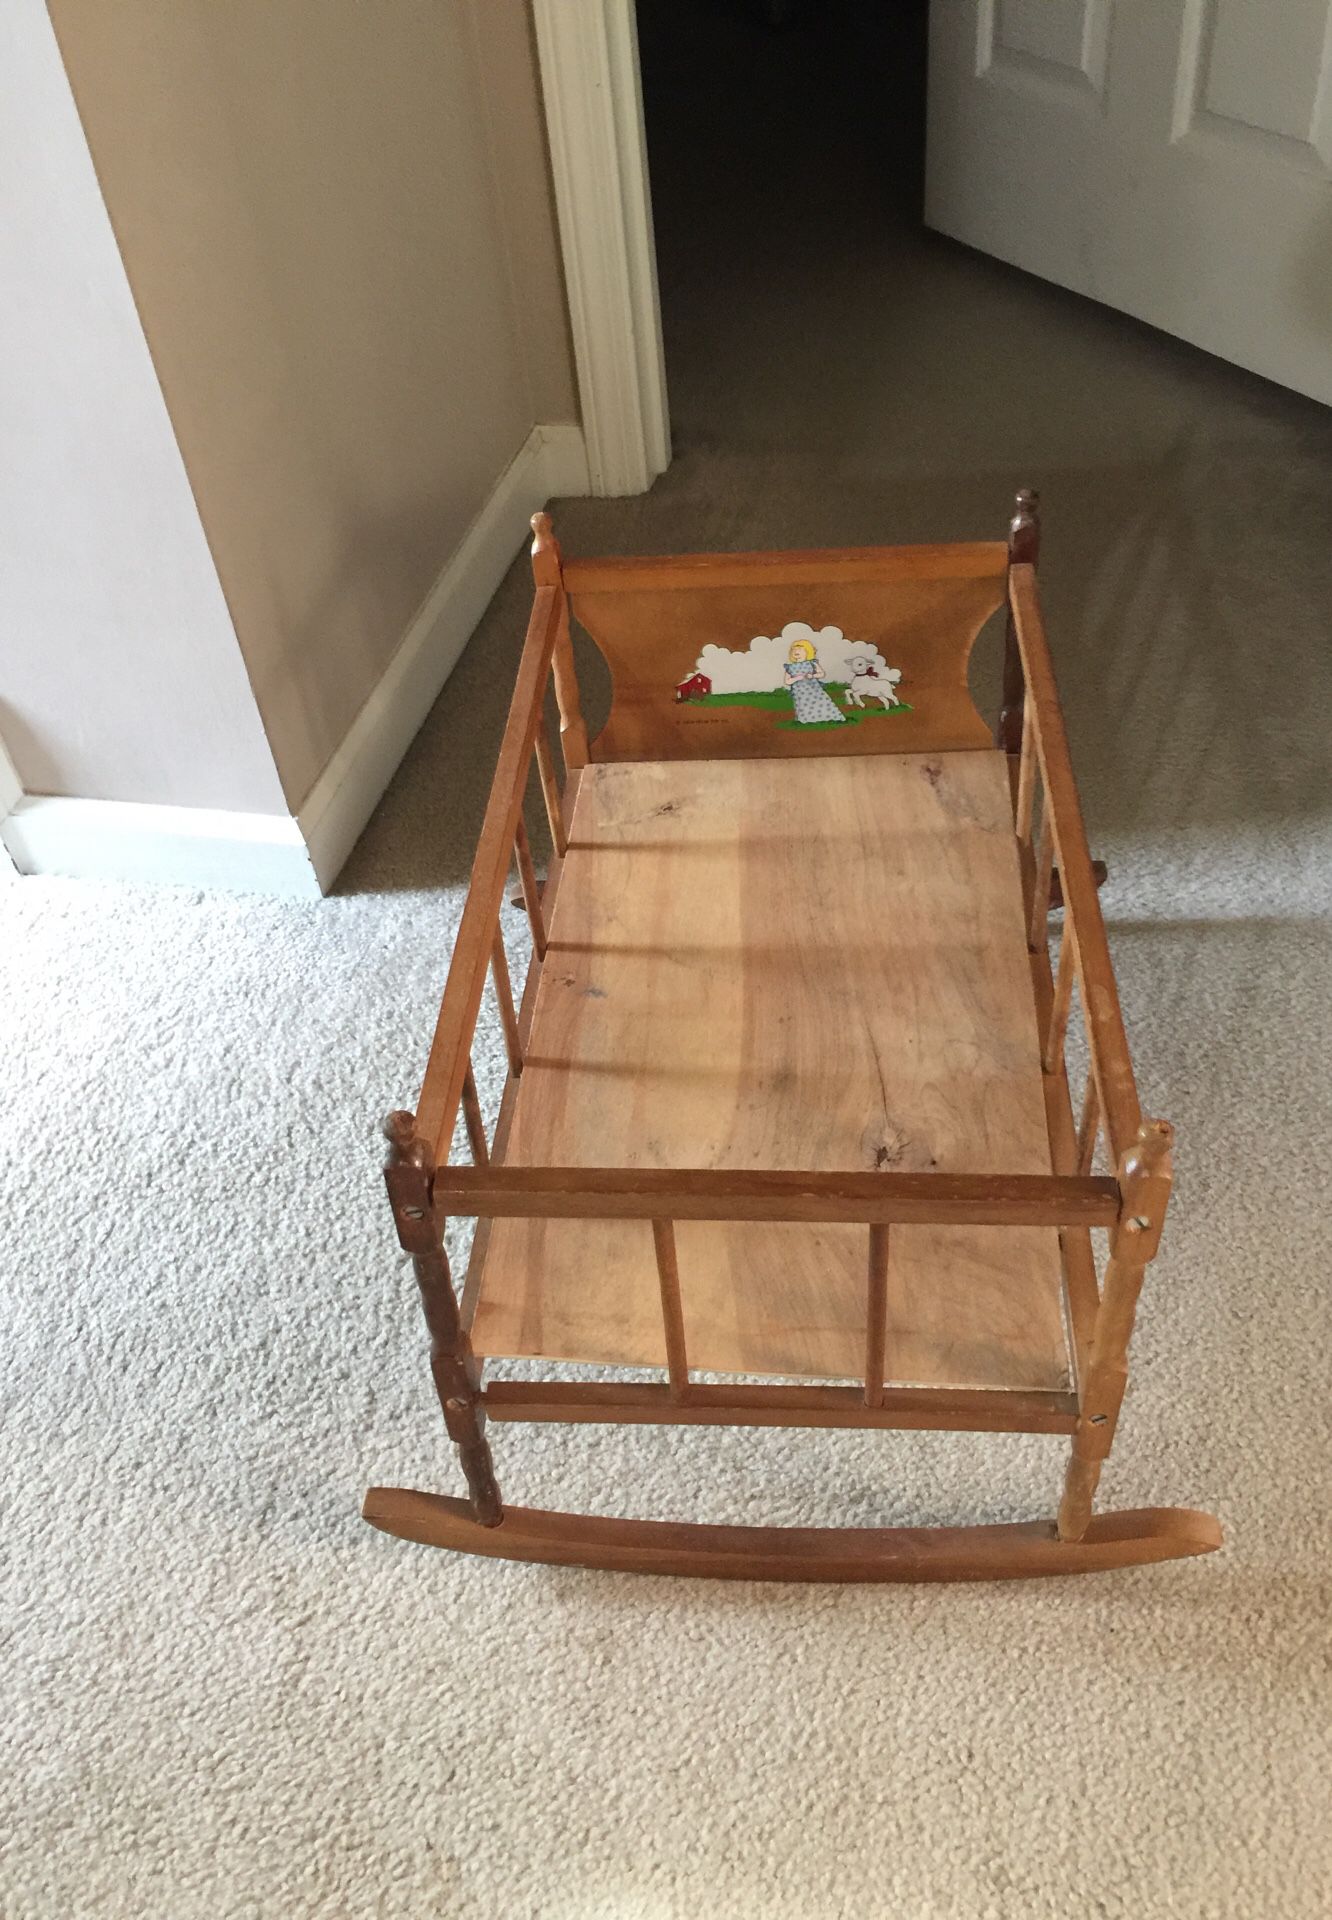 Doll bed wooden. 13 “ by 22 1/2”